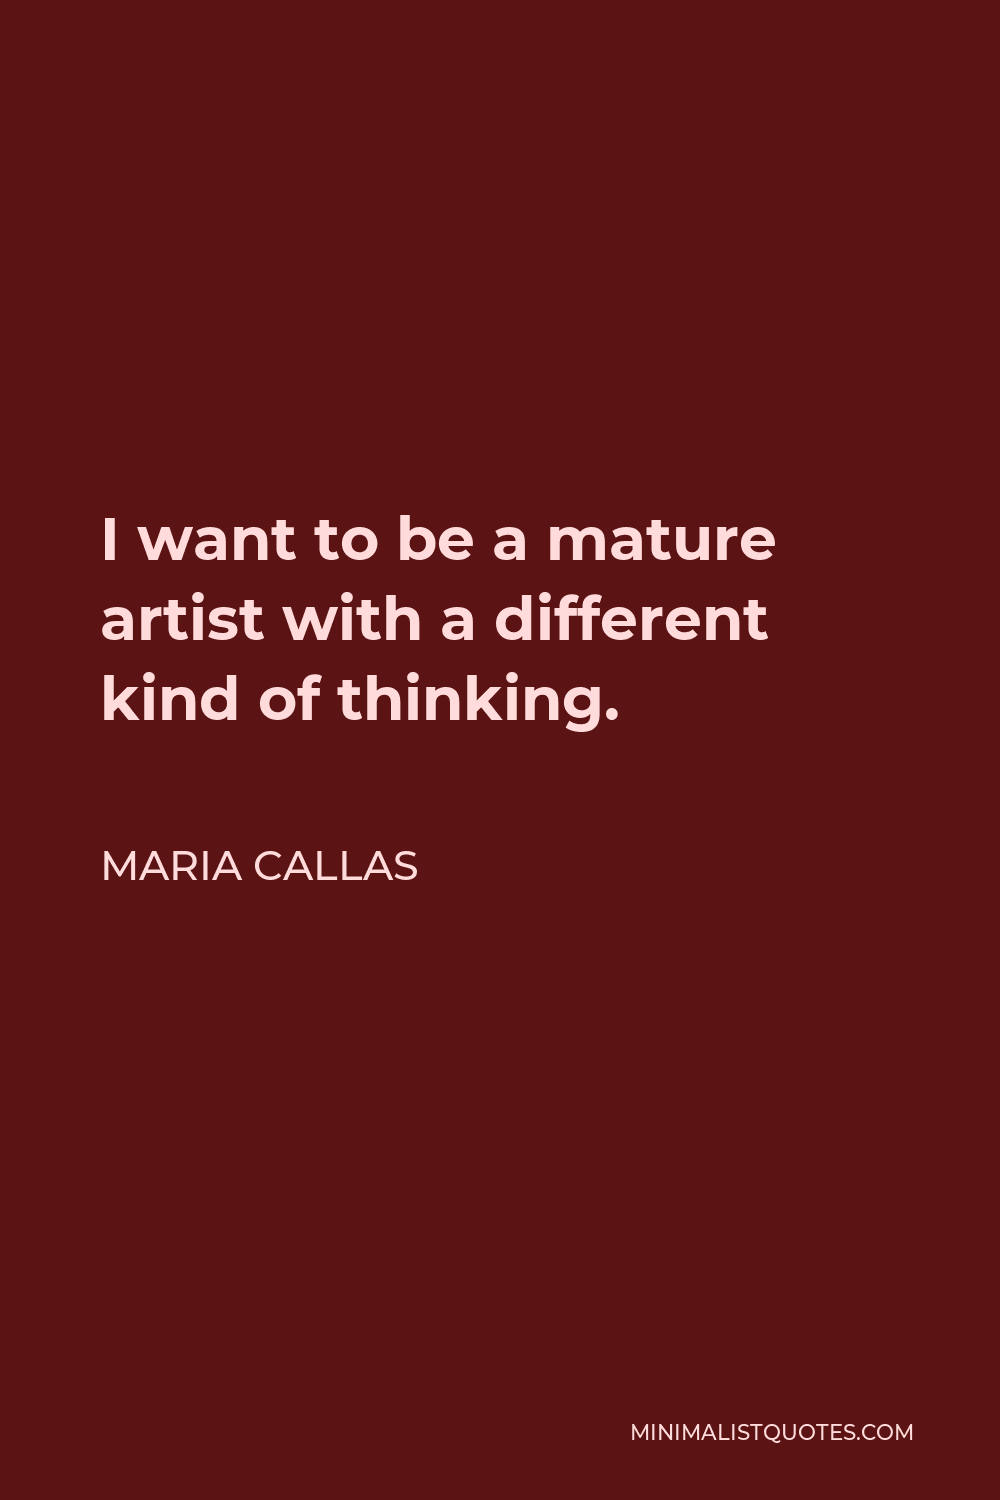 Maria Callas Quote - I want to be a mature artist with a different kind of thinking.